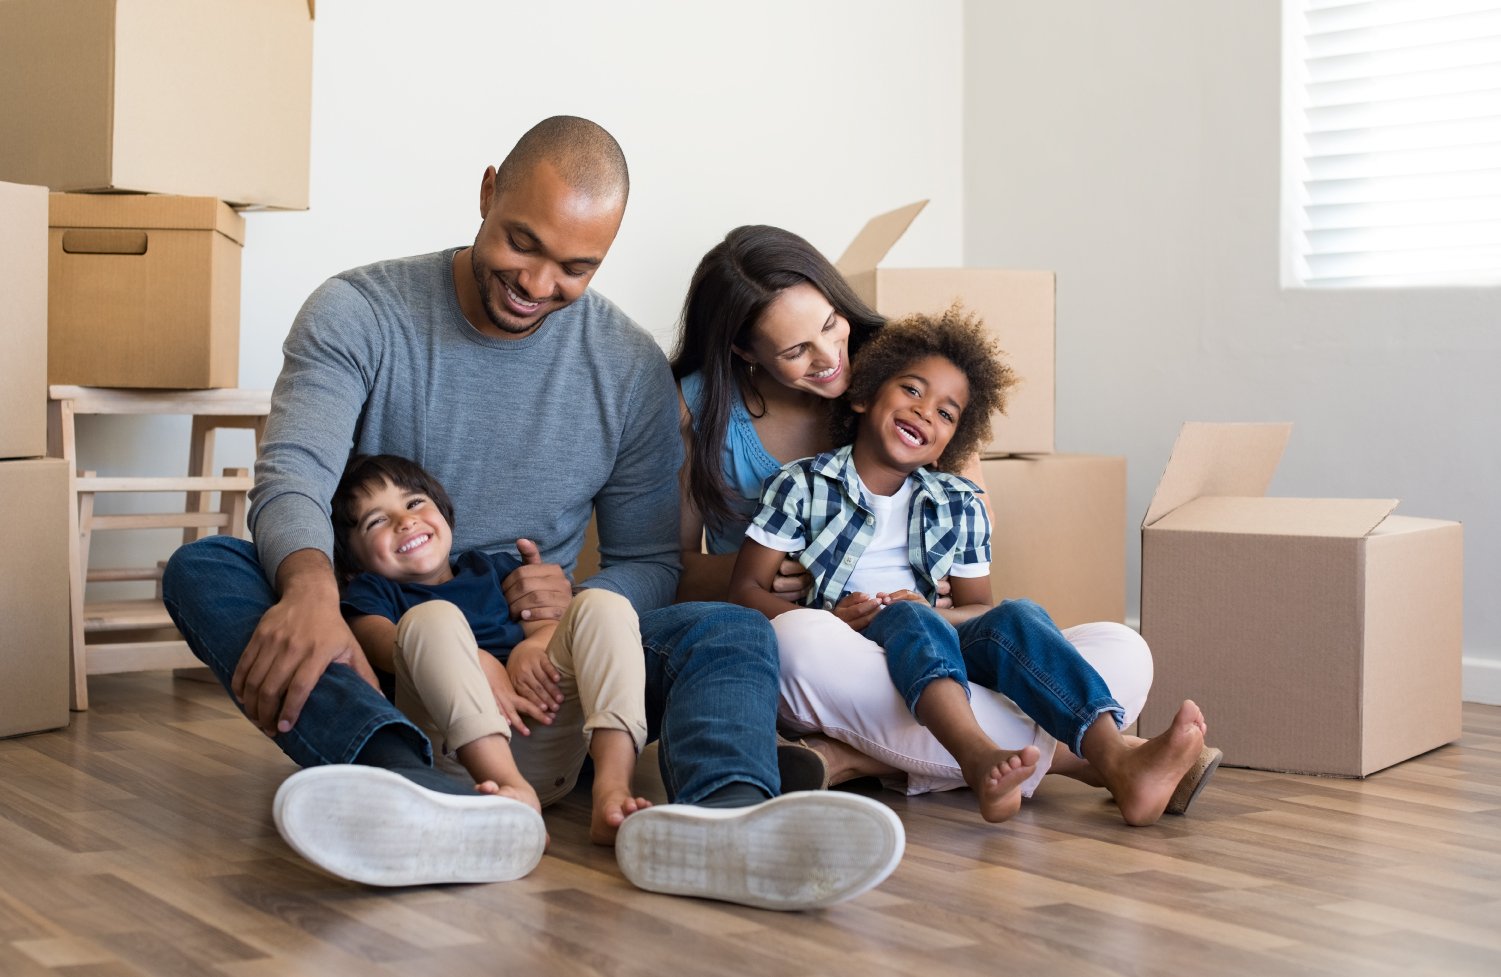 A young family unpacks after receiving home mortgage financing for their new home.